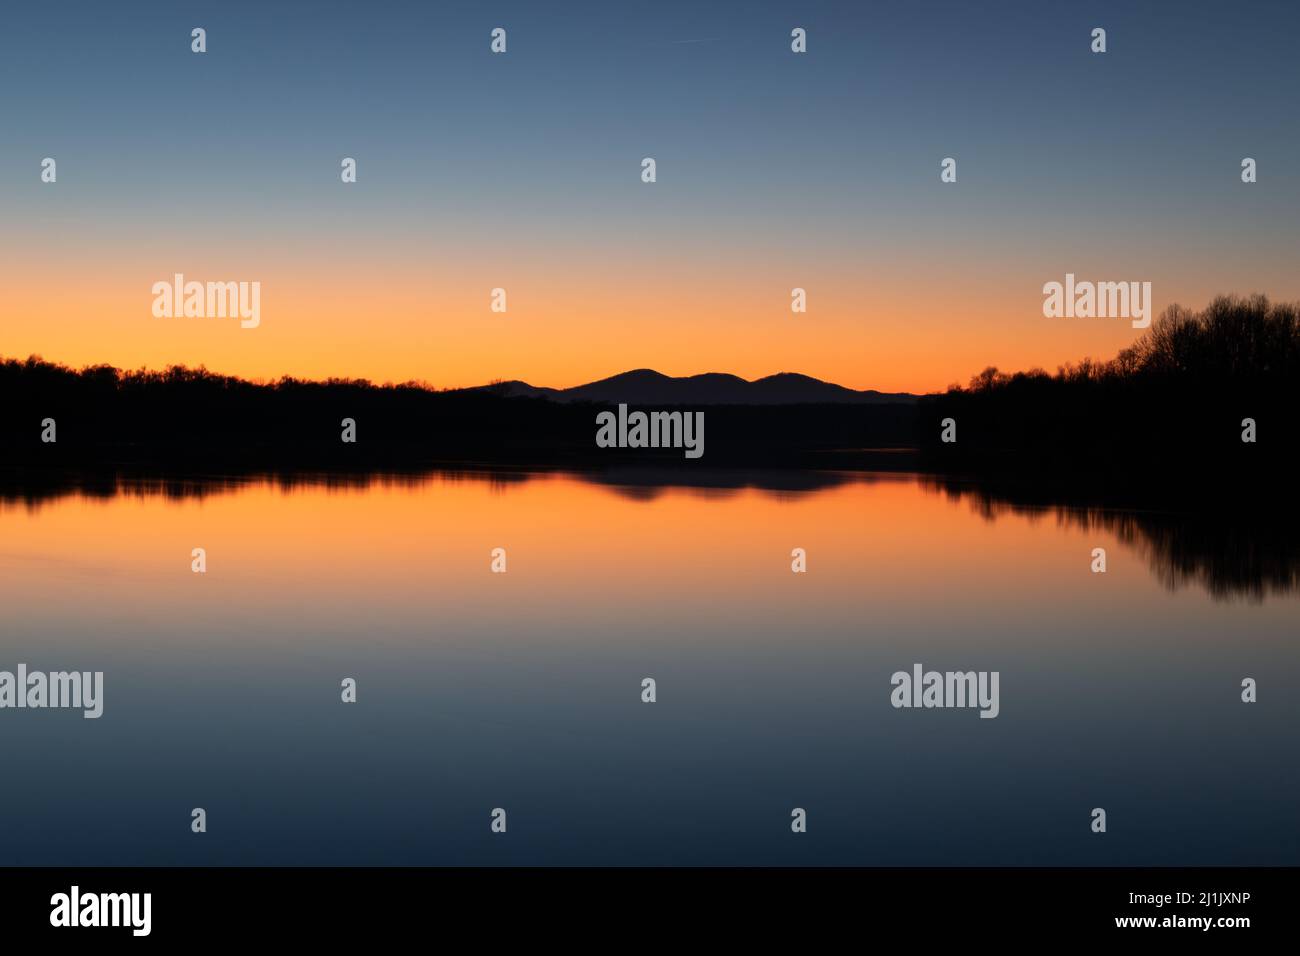 Landscape of silhouette of mountain and forest with reflection in river water against clear blue sky with orange glow at horizon at twilight Stock Photo